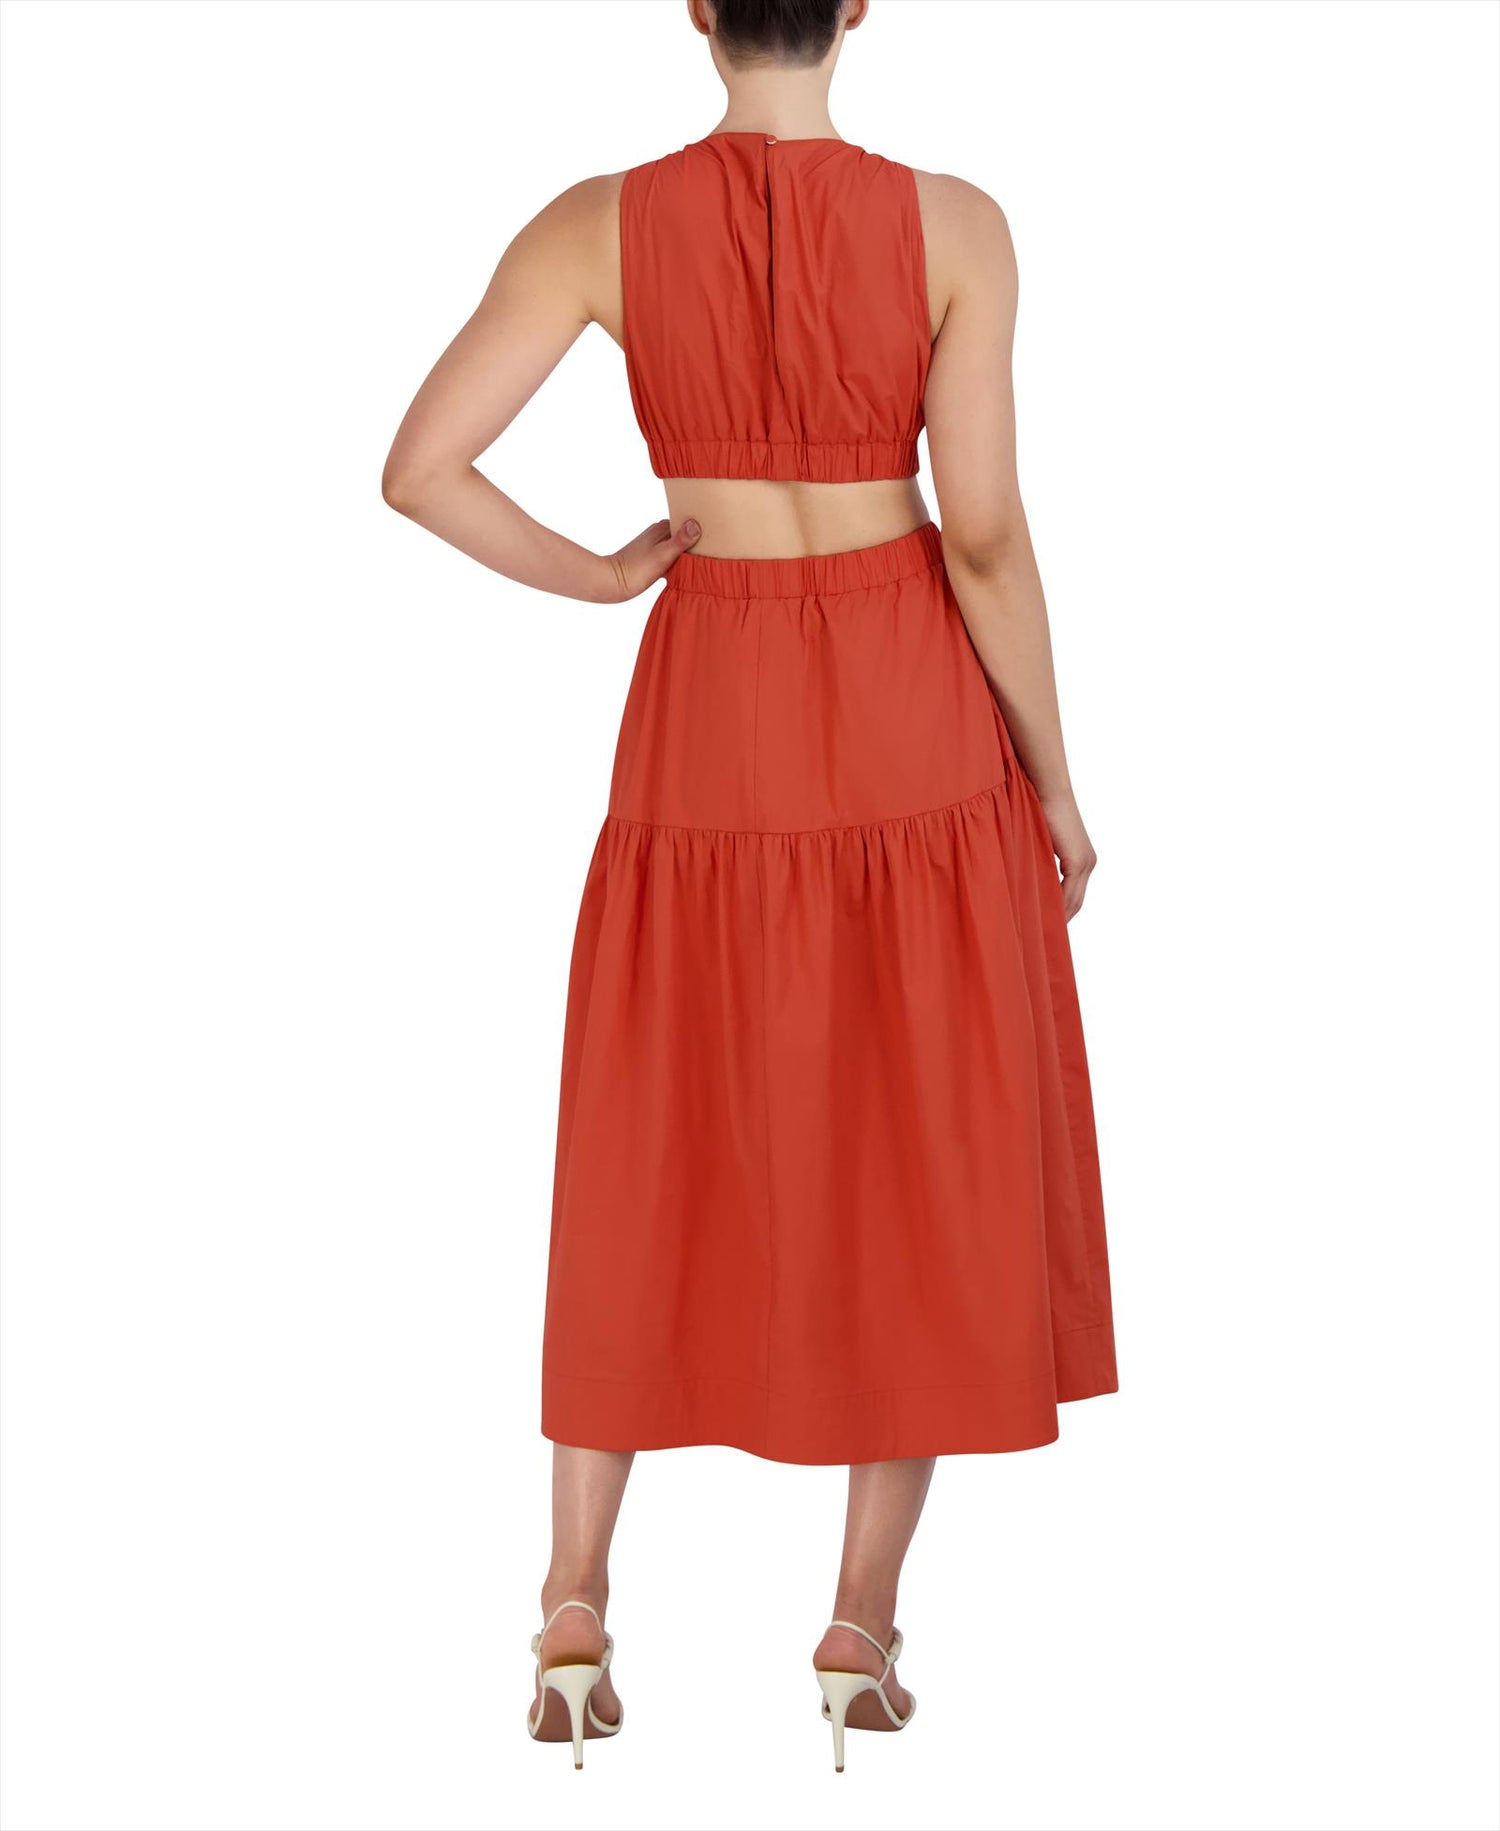 red-halter-neck-dress-with-cut-out_2x01d26_autumn_02